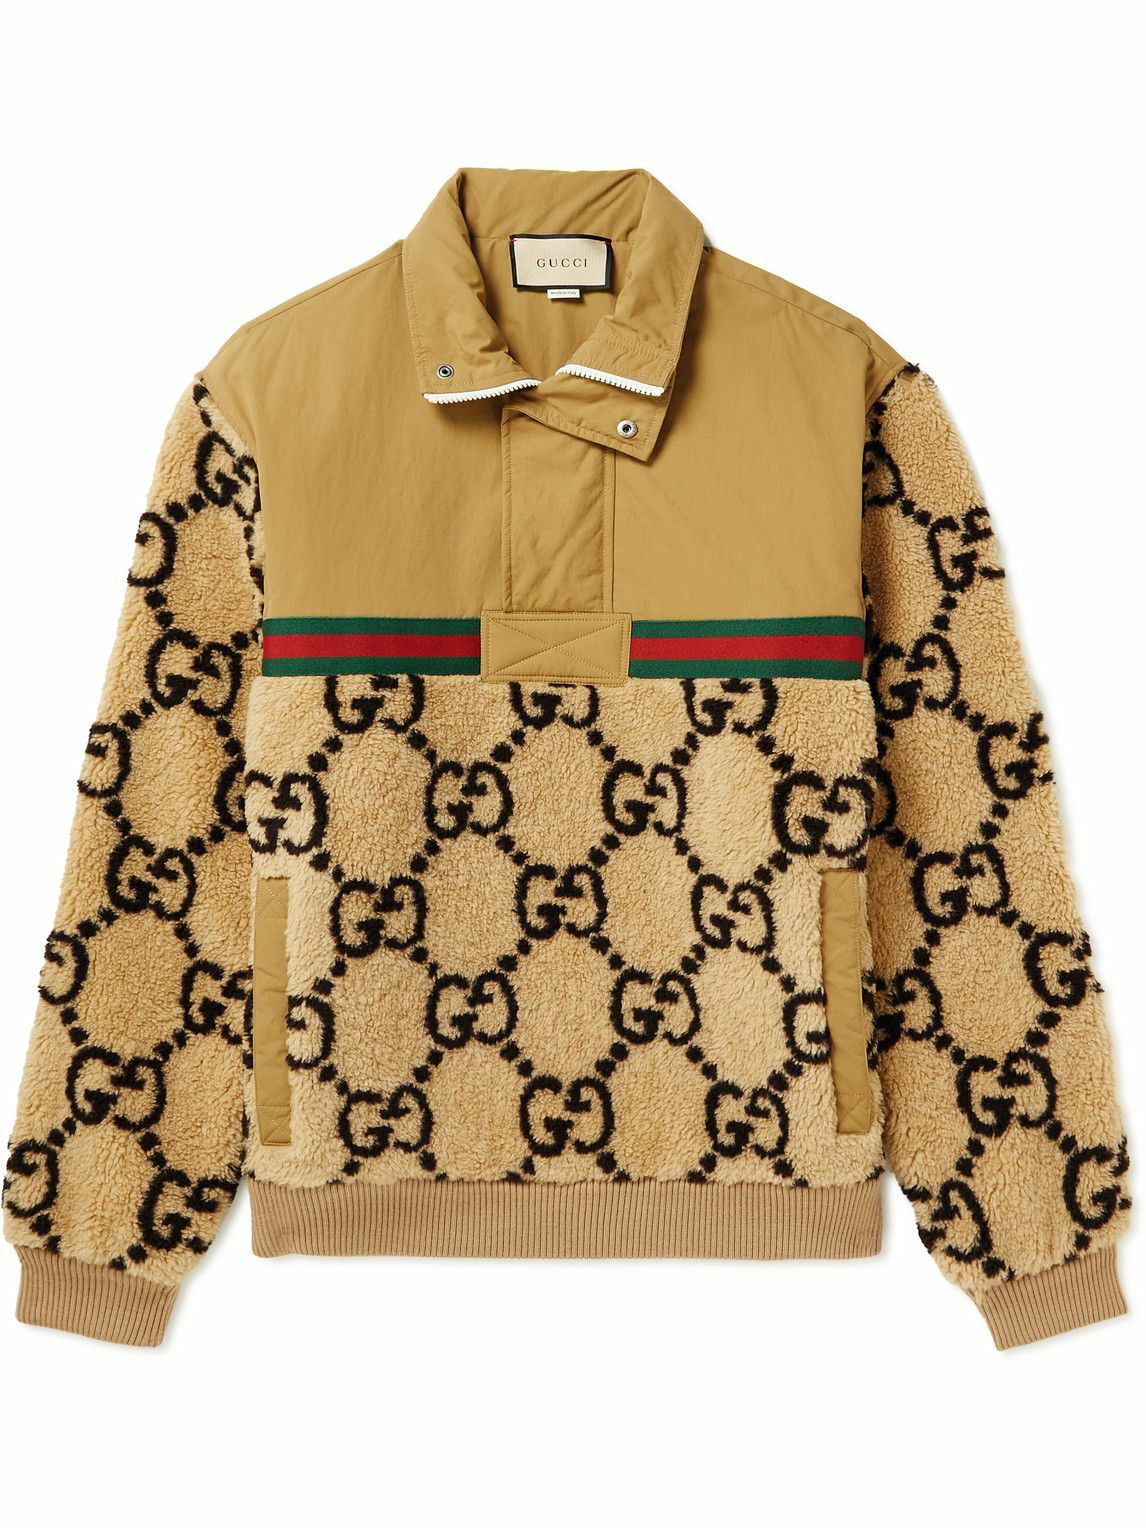 Gucci Baroque Jacquard Bomber Jacket In Bordeaux